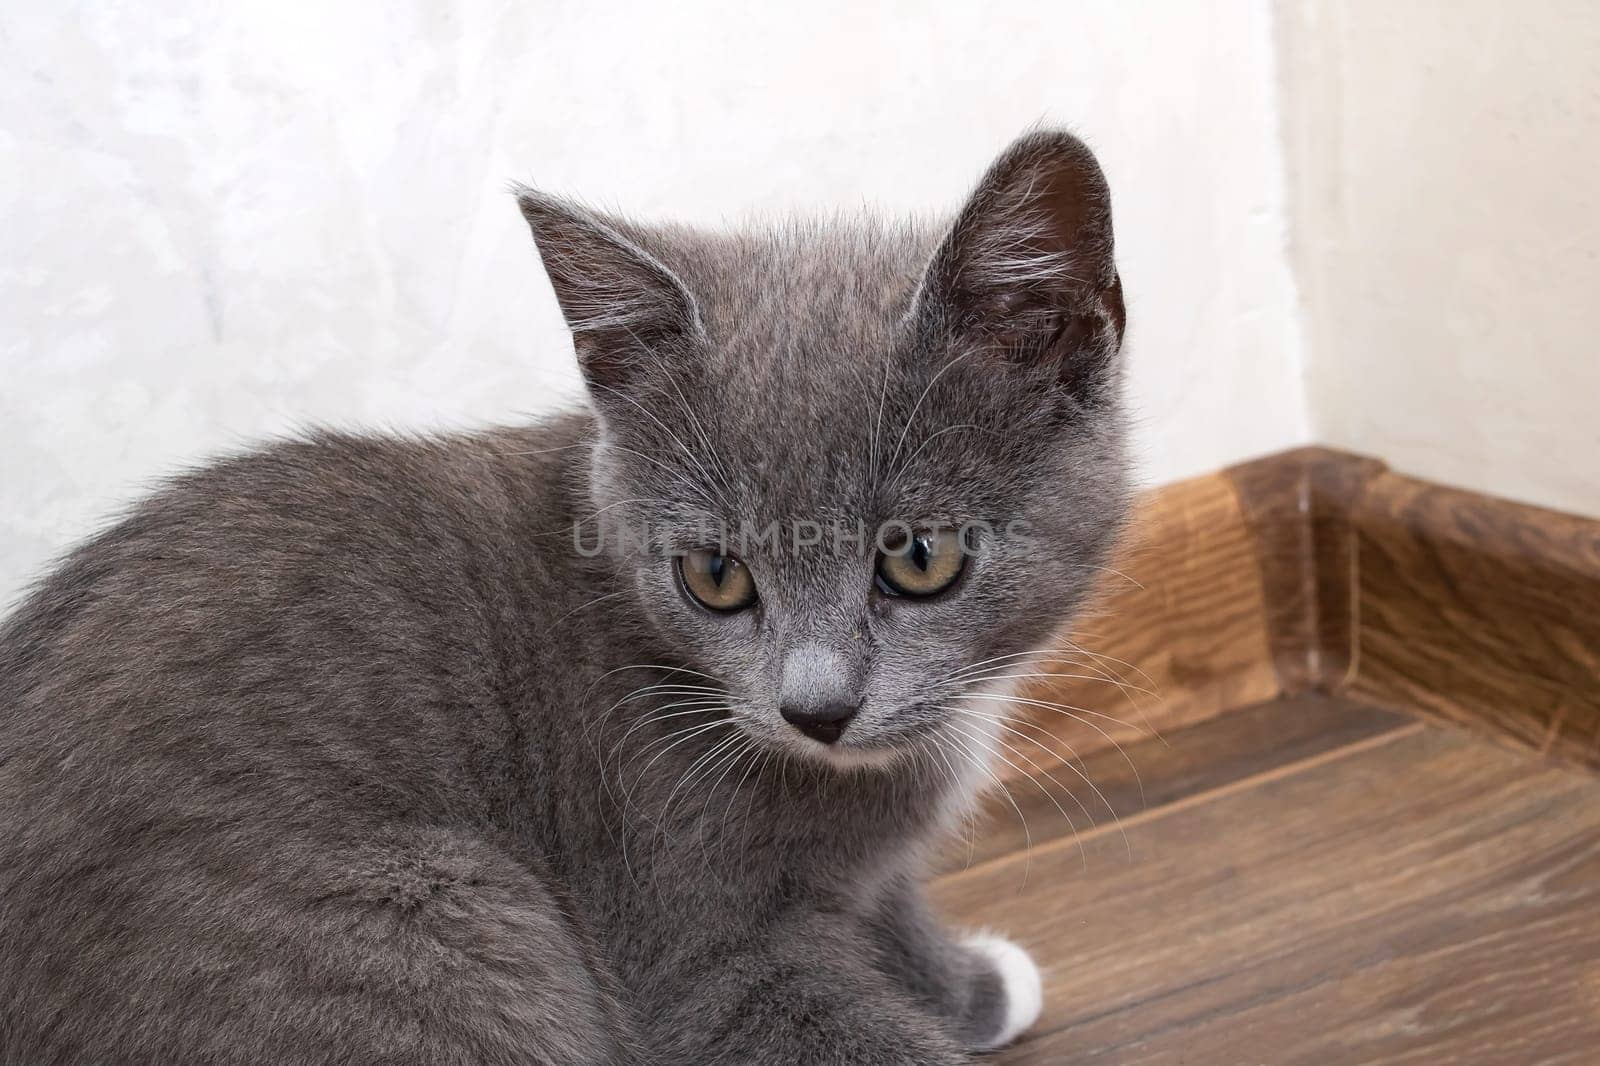 Small grey kitten close-up portrait at home by Vera1703